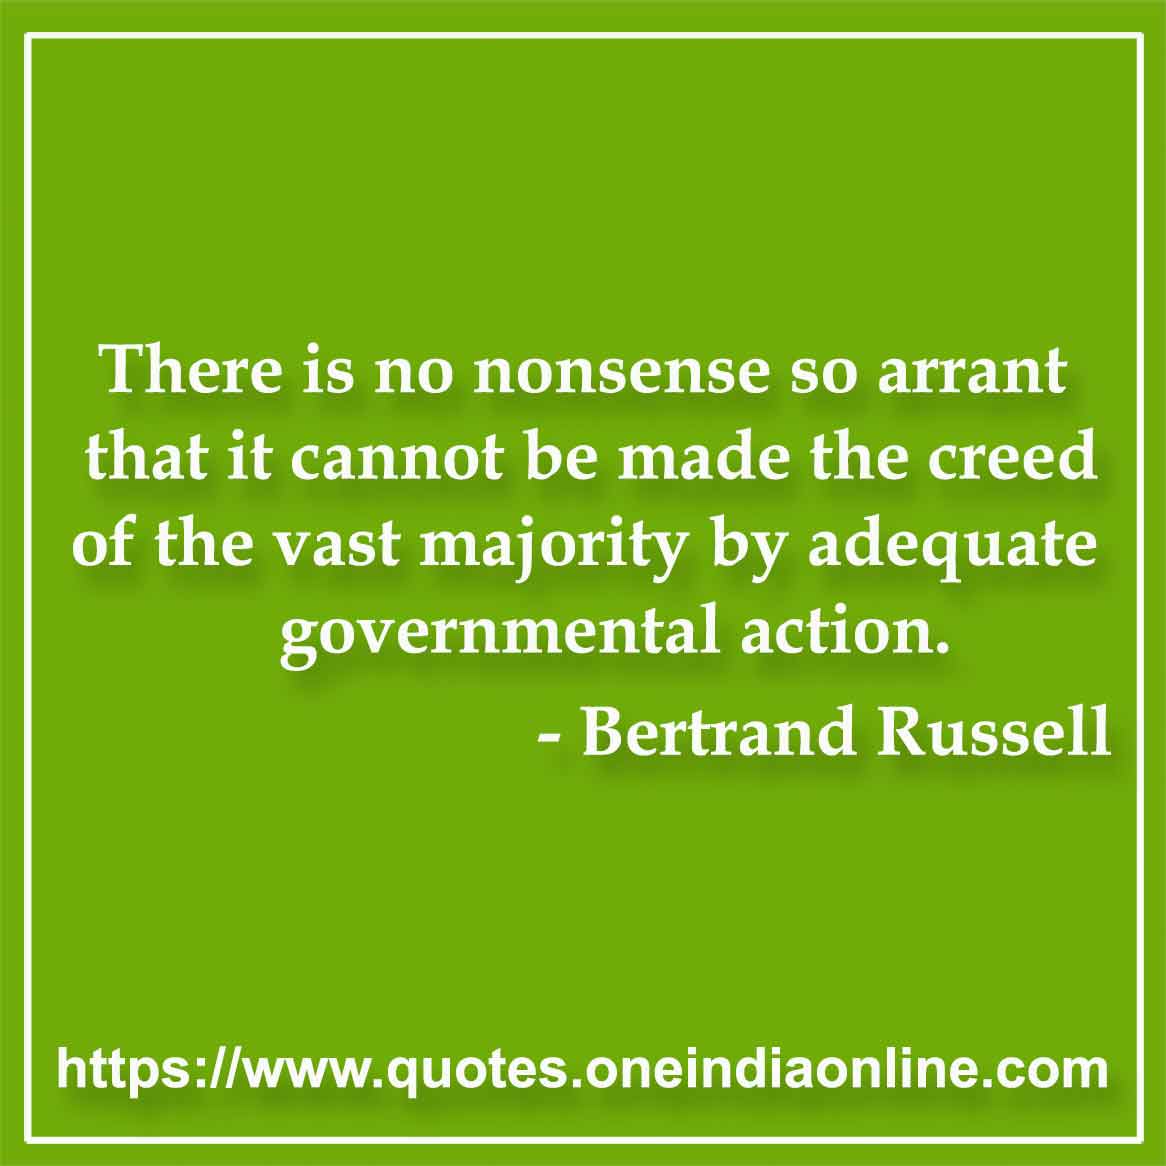 There is no nonsense so arrant that it cannot be made the creed of the vast majority by adequate governmental action.

- Government Quotes by Bertrand Russell